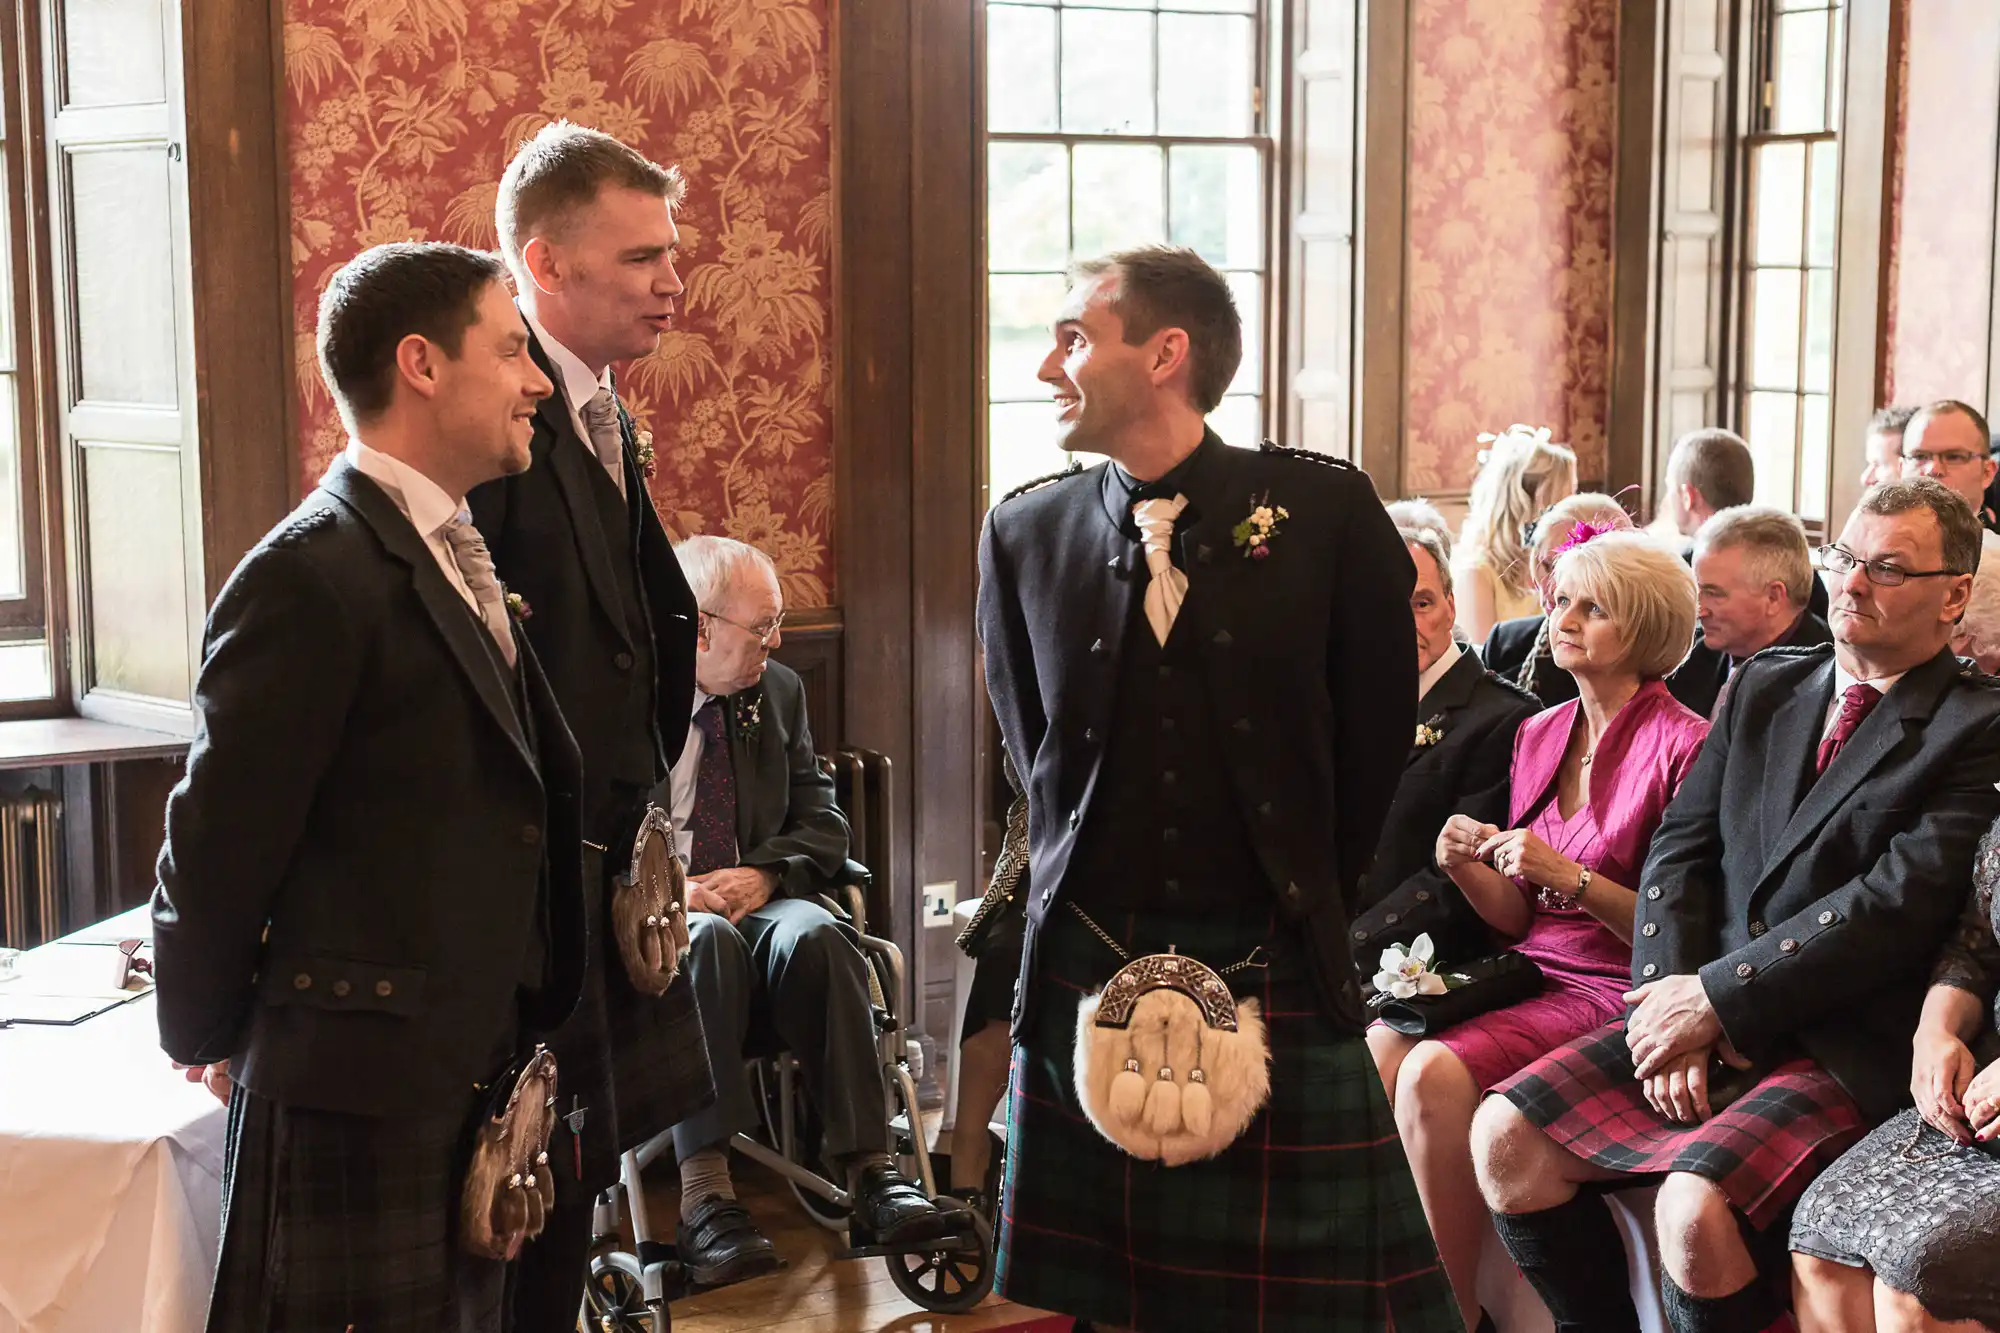 Two men in traditional scottish kilts smiling at each other in a wedding ceremony, with guests seated around in a decorated room.